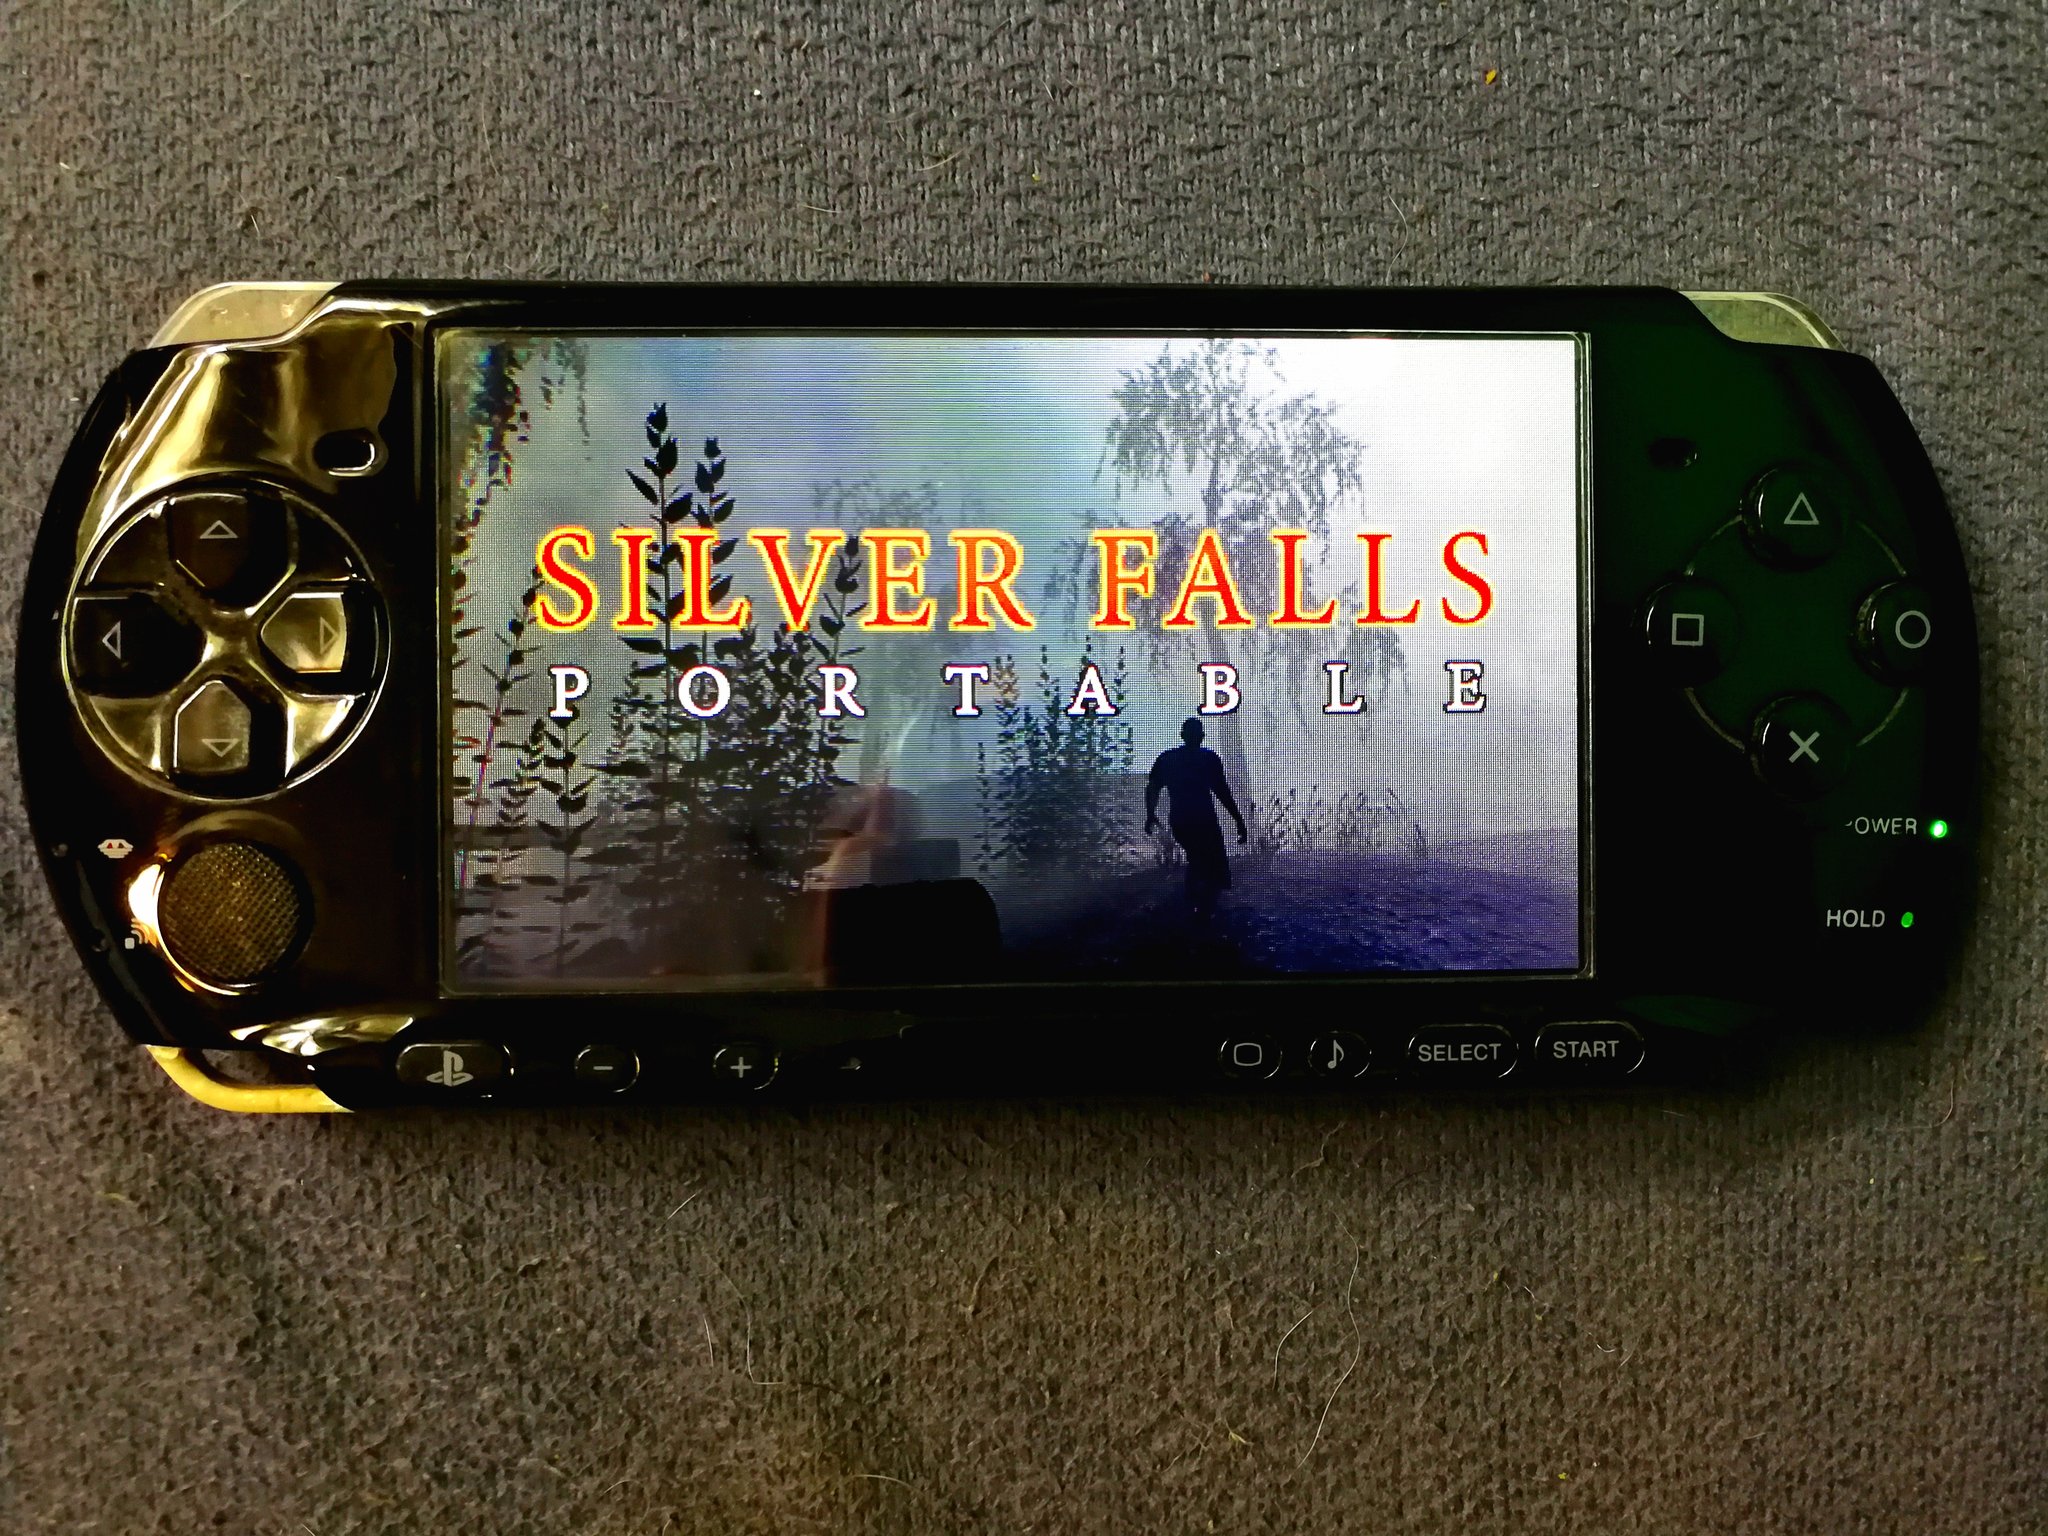 Silver Falls on Twitter: "Wouldn't it be cool if we made a free #PSP homebrew game? https://t.co/Eu1UQd5jxF" Twitter